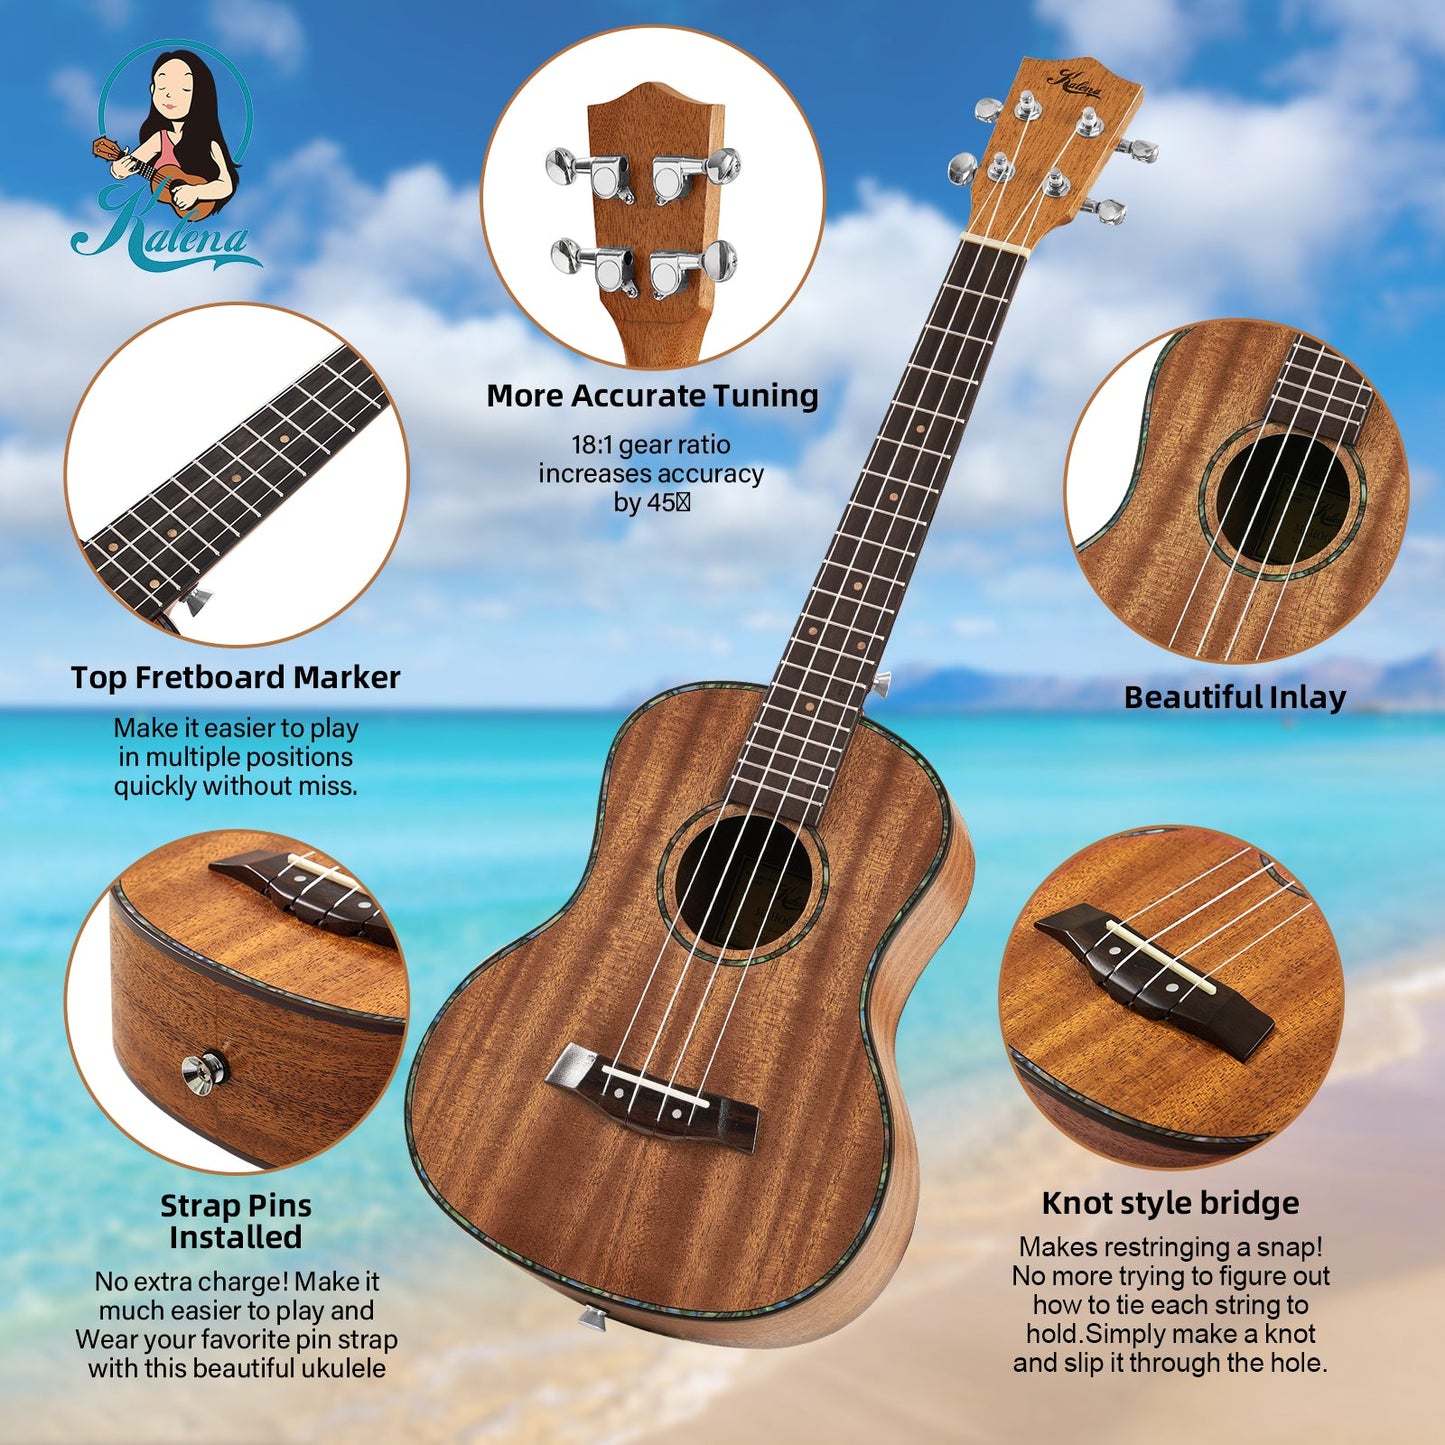 Kalena LM series Tenor Mahogany Ukulele with Celluloid Binding Traditional EQ complete set: Strings, Picks, Strap, Digital Tuner, Padded Case, Starter Guide